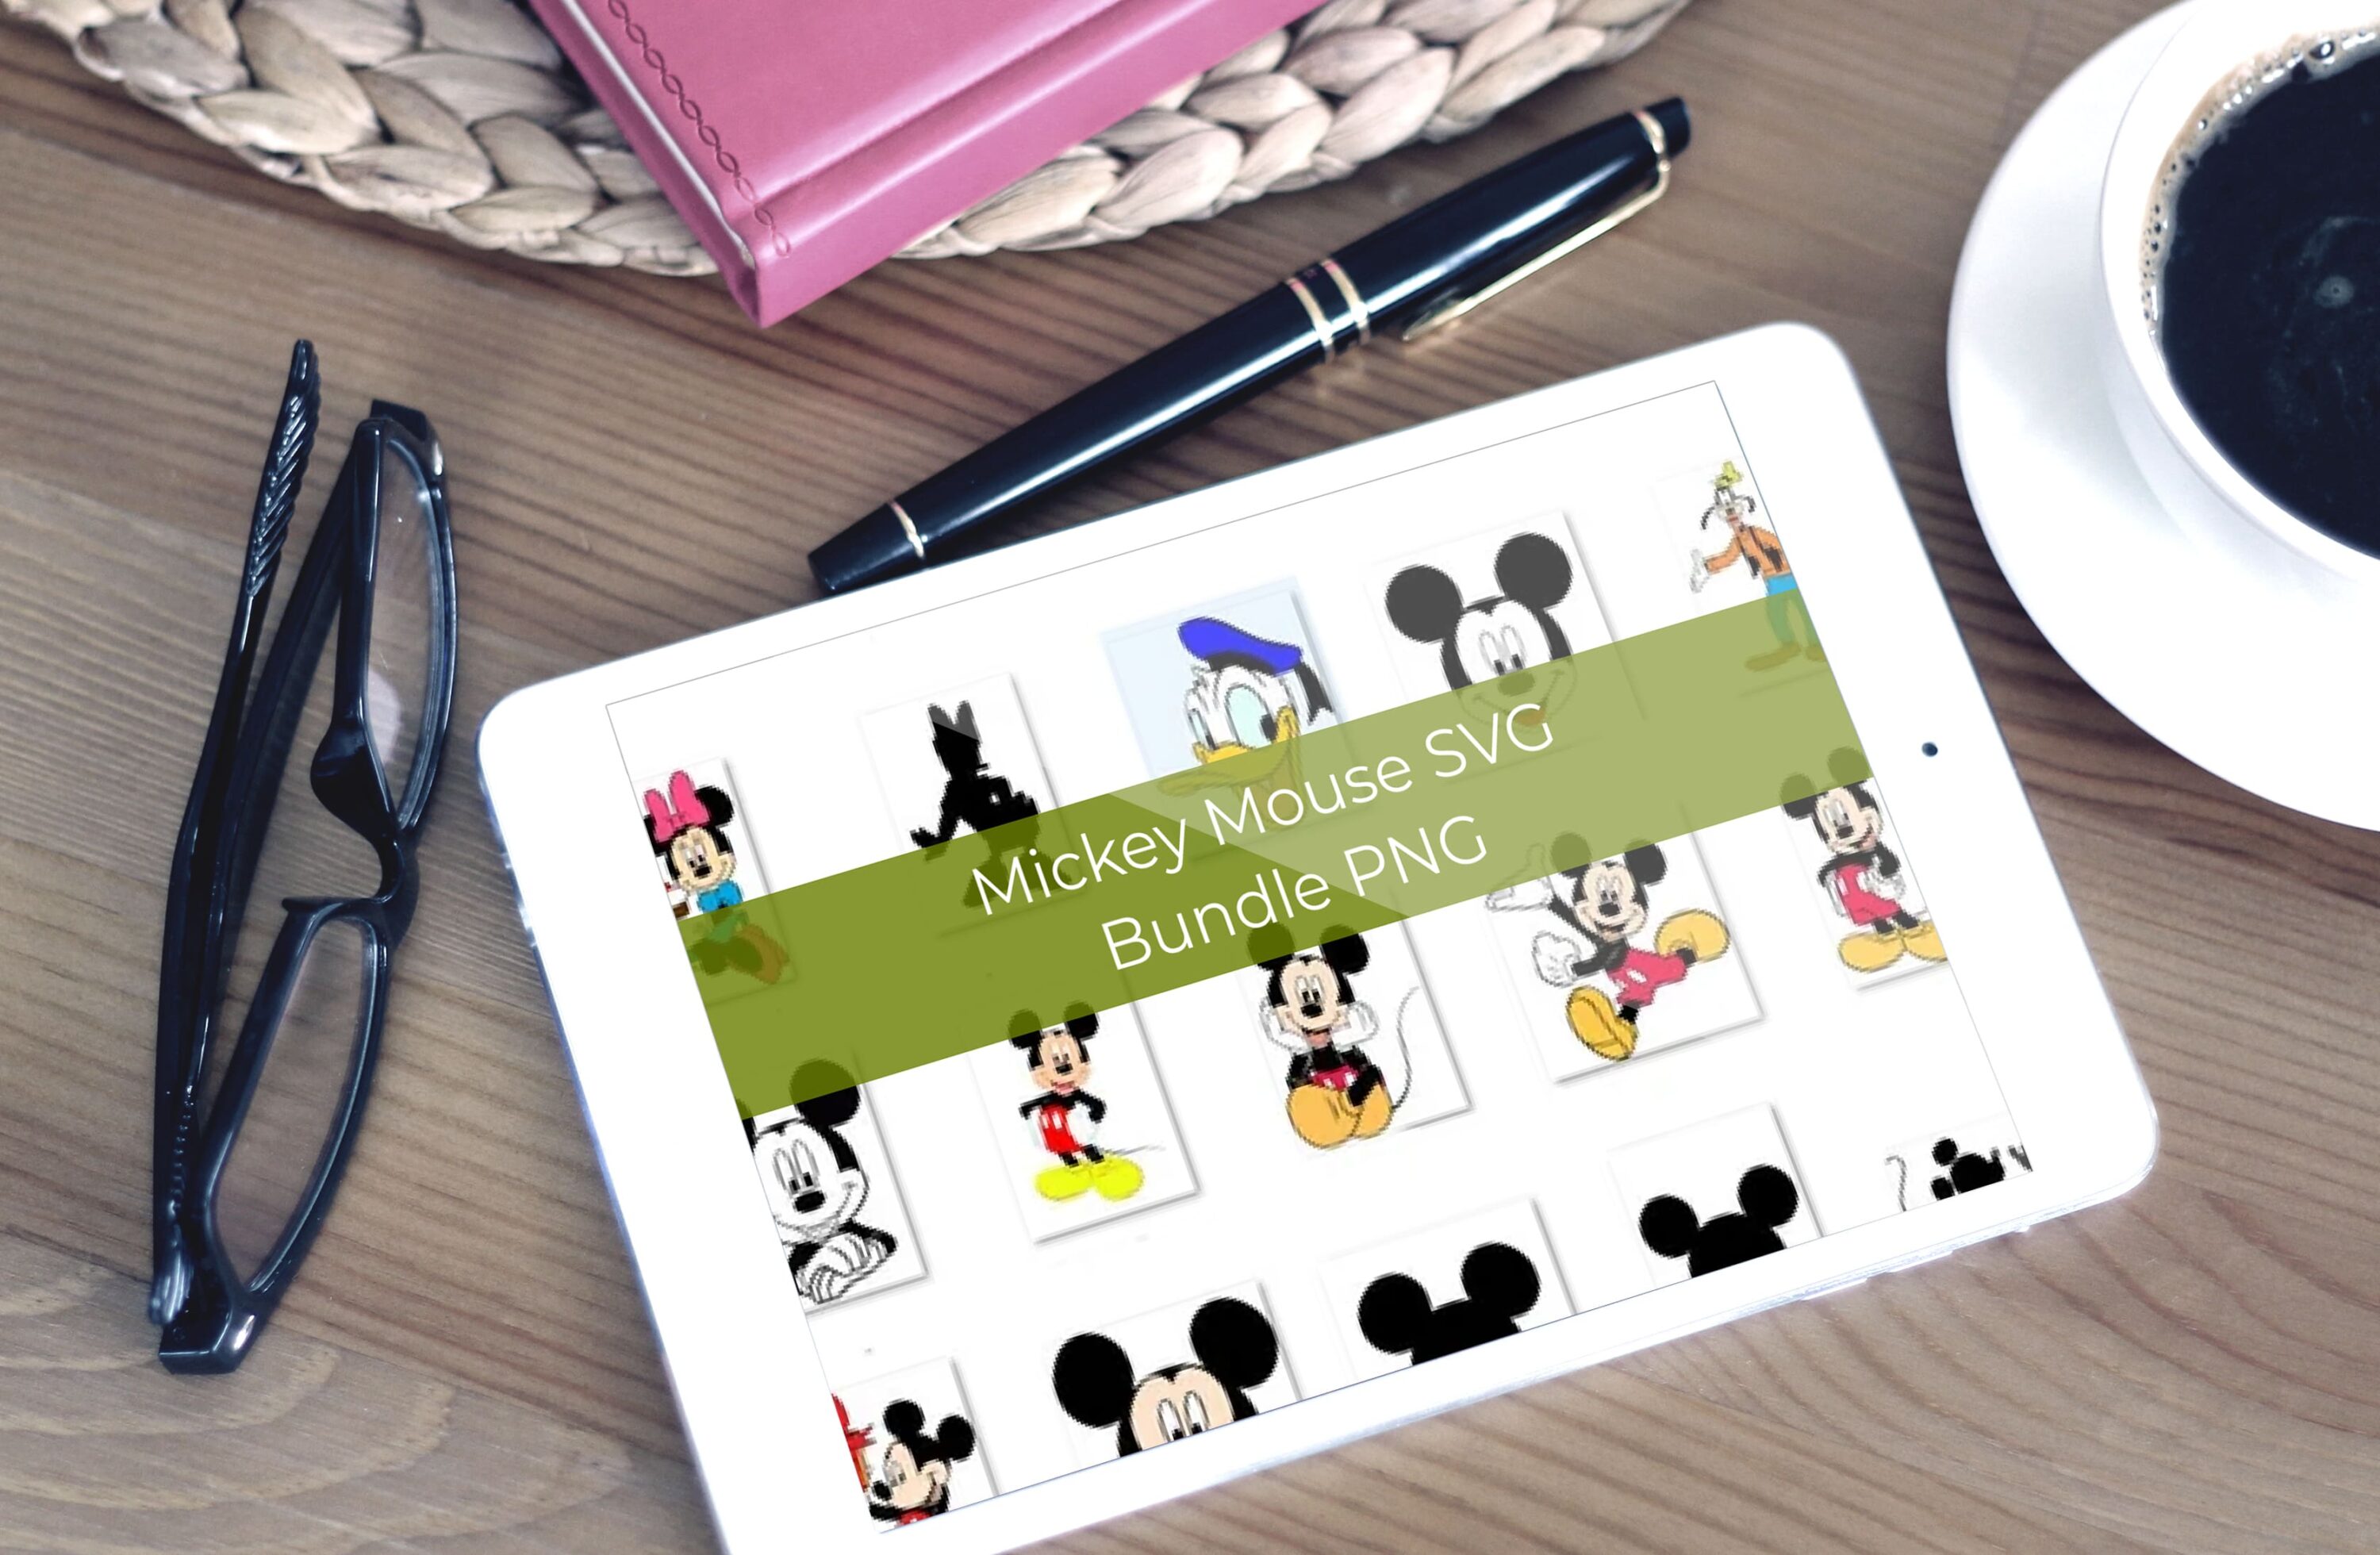 Tablet option of the Mickey Mouse SVG Bundle PNG.